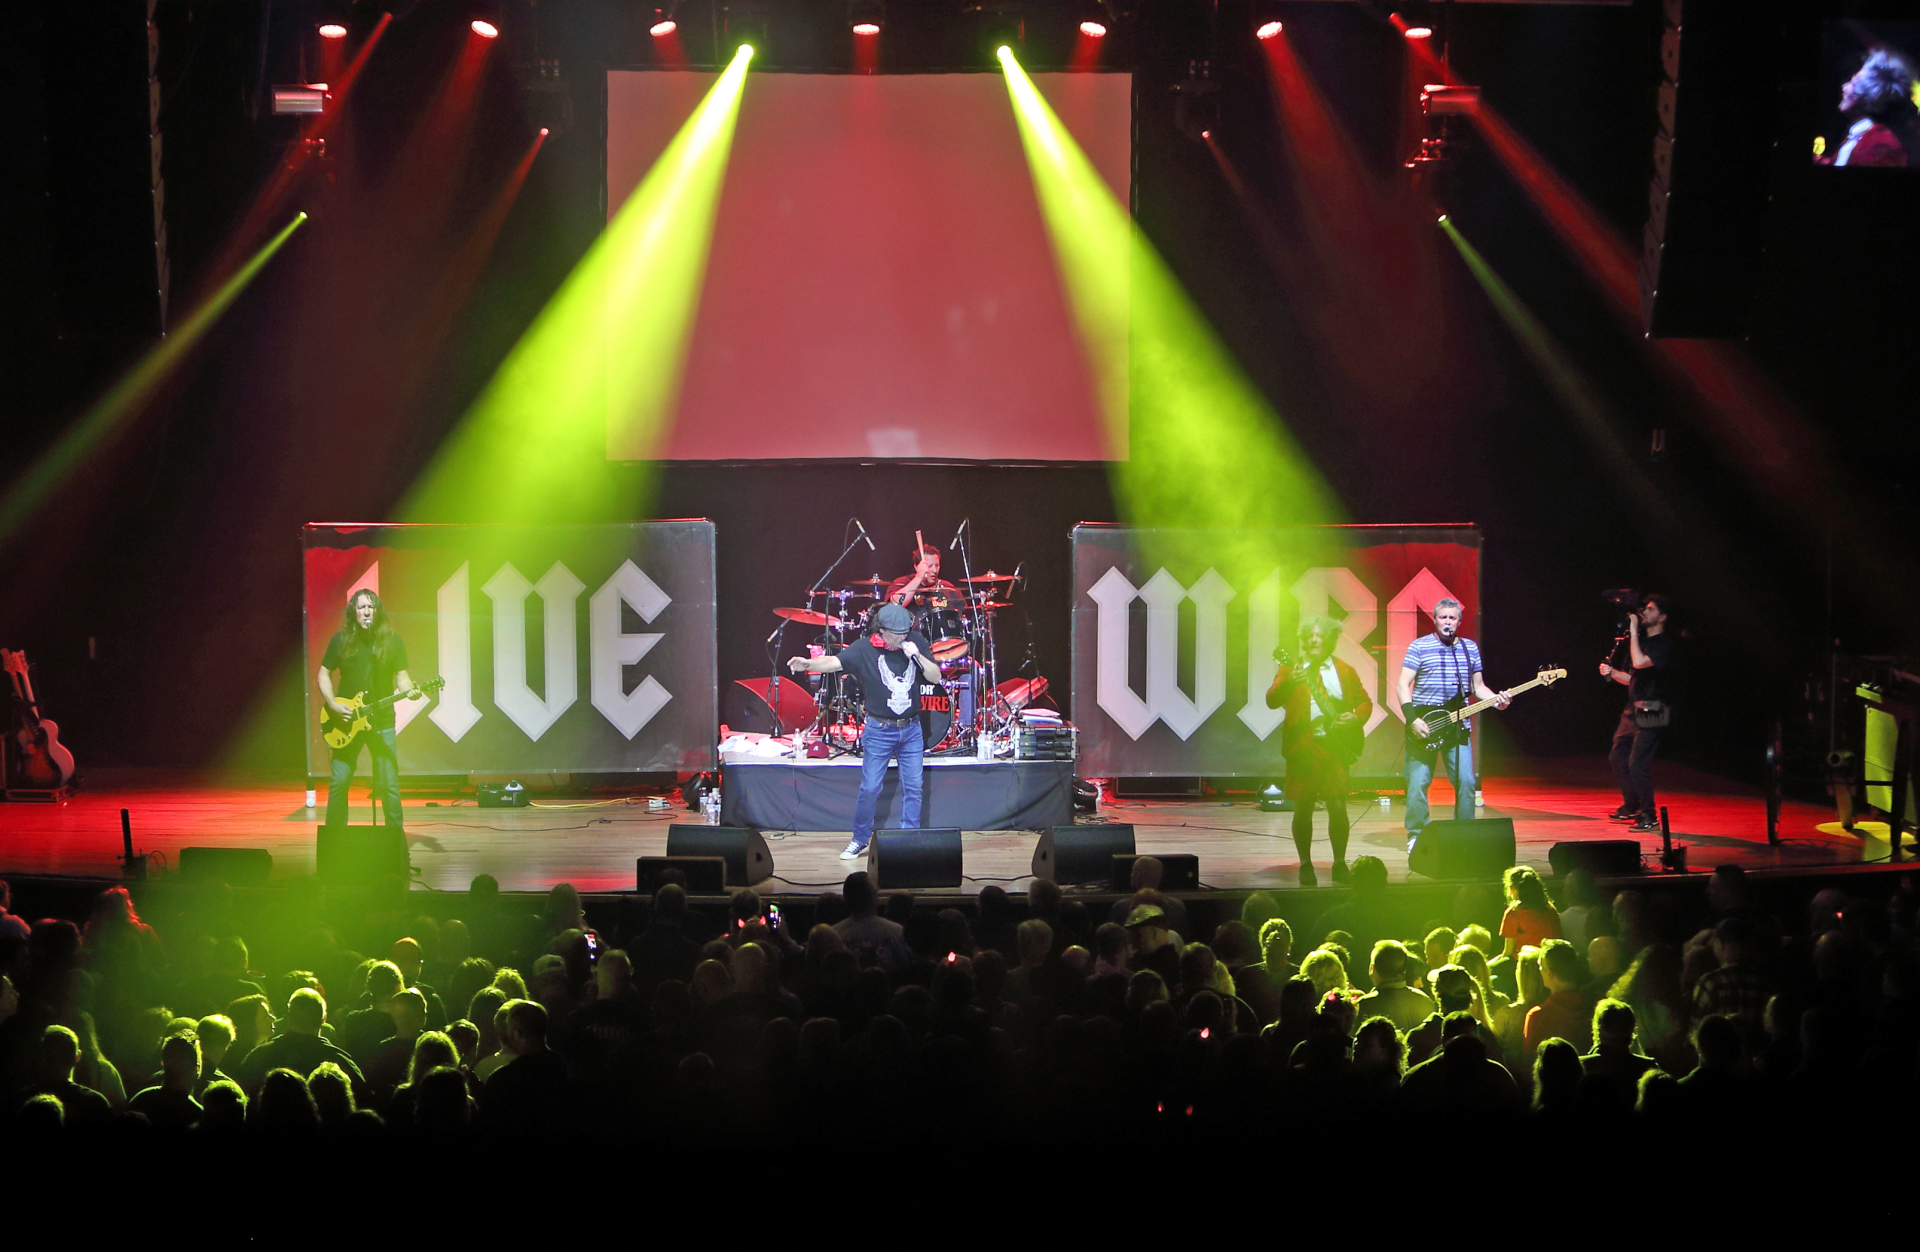 Live/Wire - Electrifying AC/DC Rock Band Tribute Show